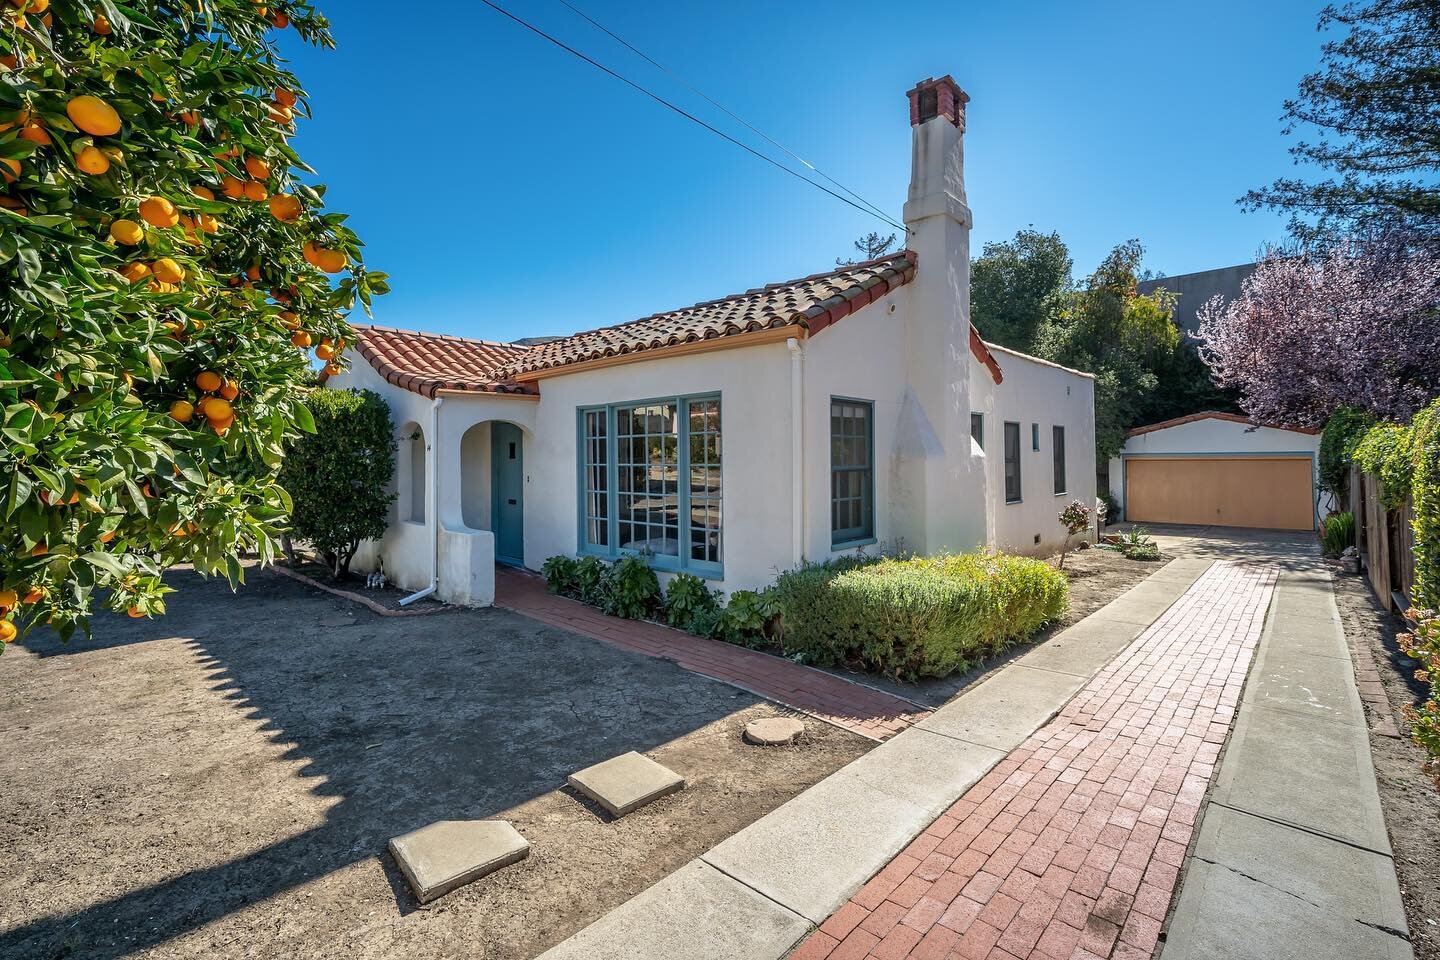 Closed📍1421 Palm St | San Luis Obispo

Listed for $1,085,000 | Sold for $1,100,000

Excited to announce the close of this charming 1940s Spanish style home in the heart of San Luis Obispo for $15k over asking!

Listed with:
Far&iacute;d Shah&iacute;